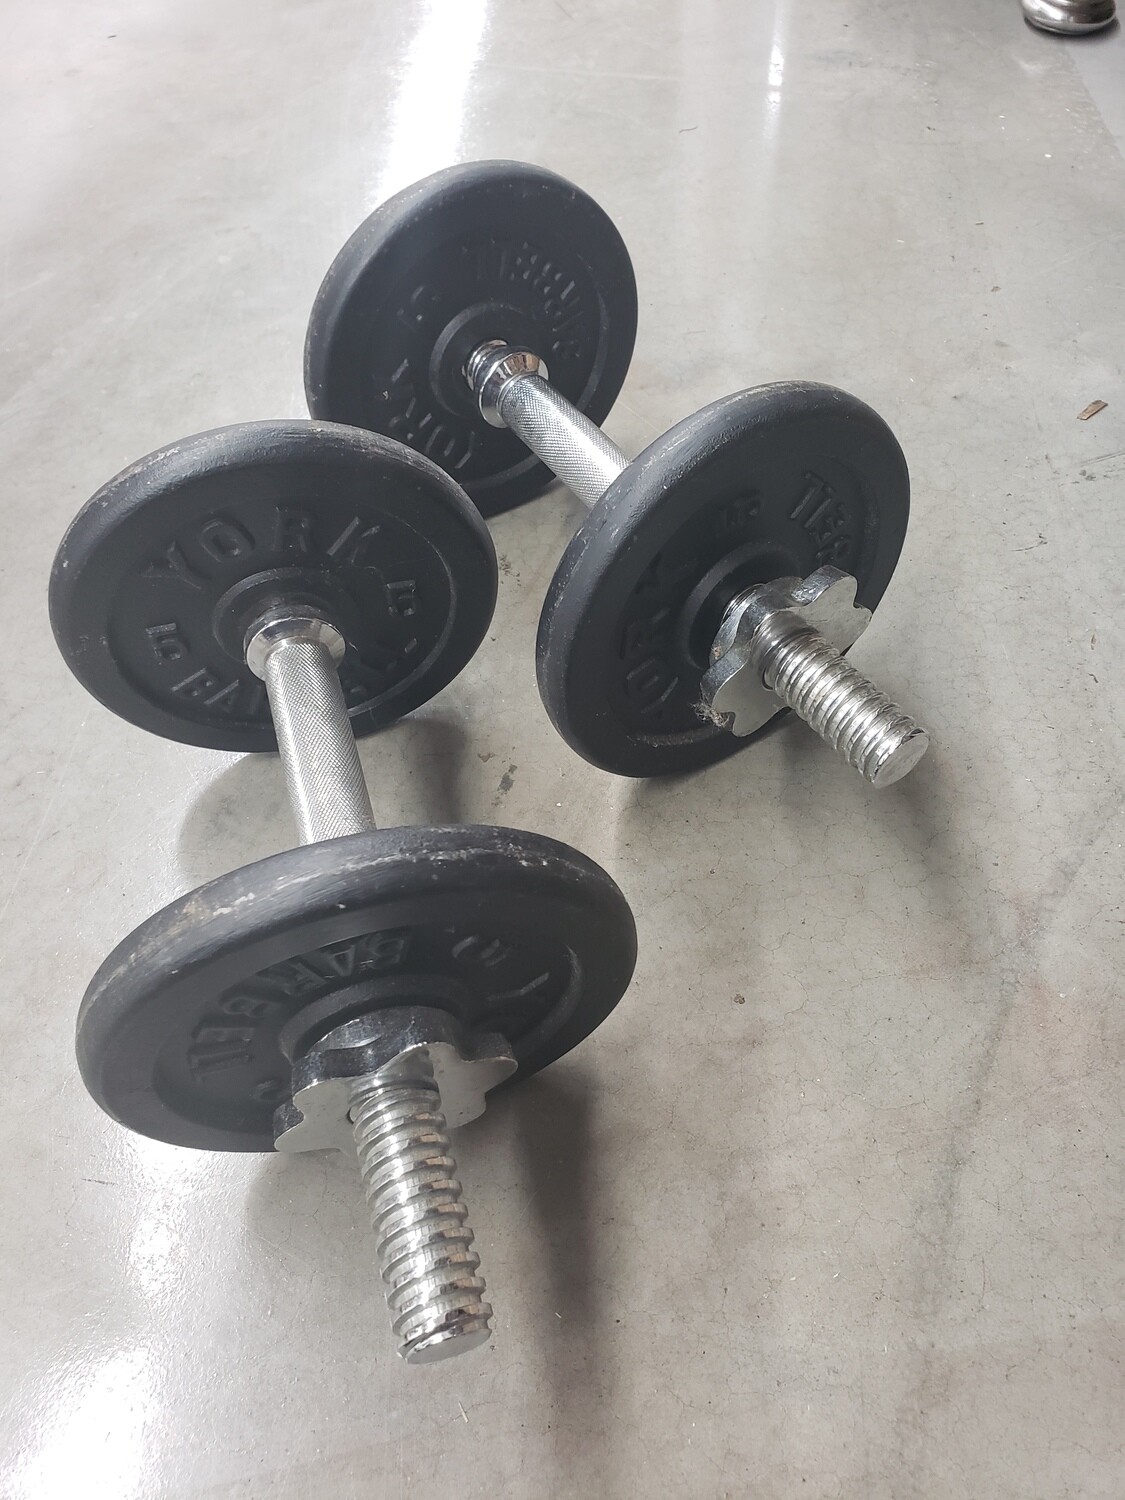 Set of 10 lb. weights #2114